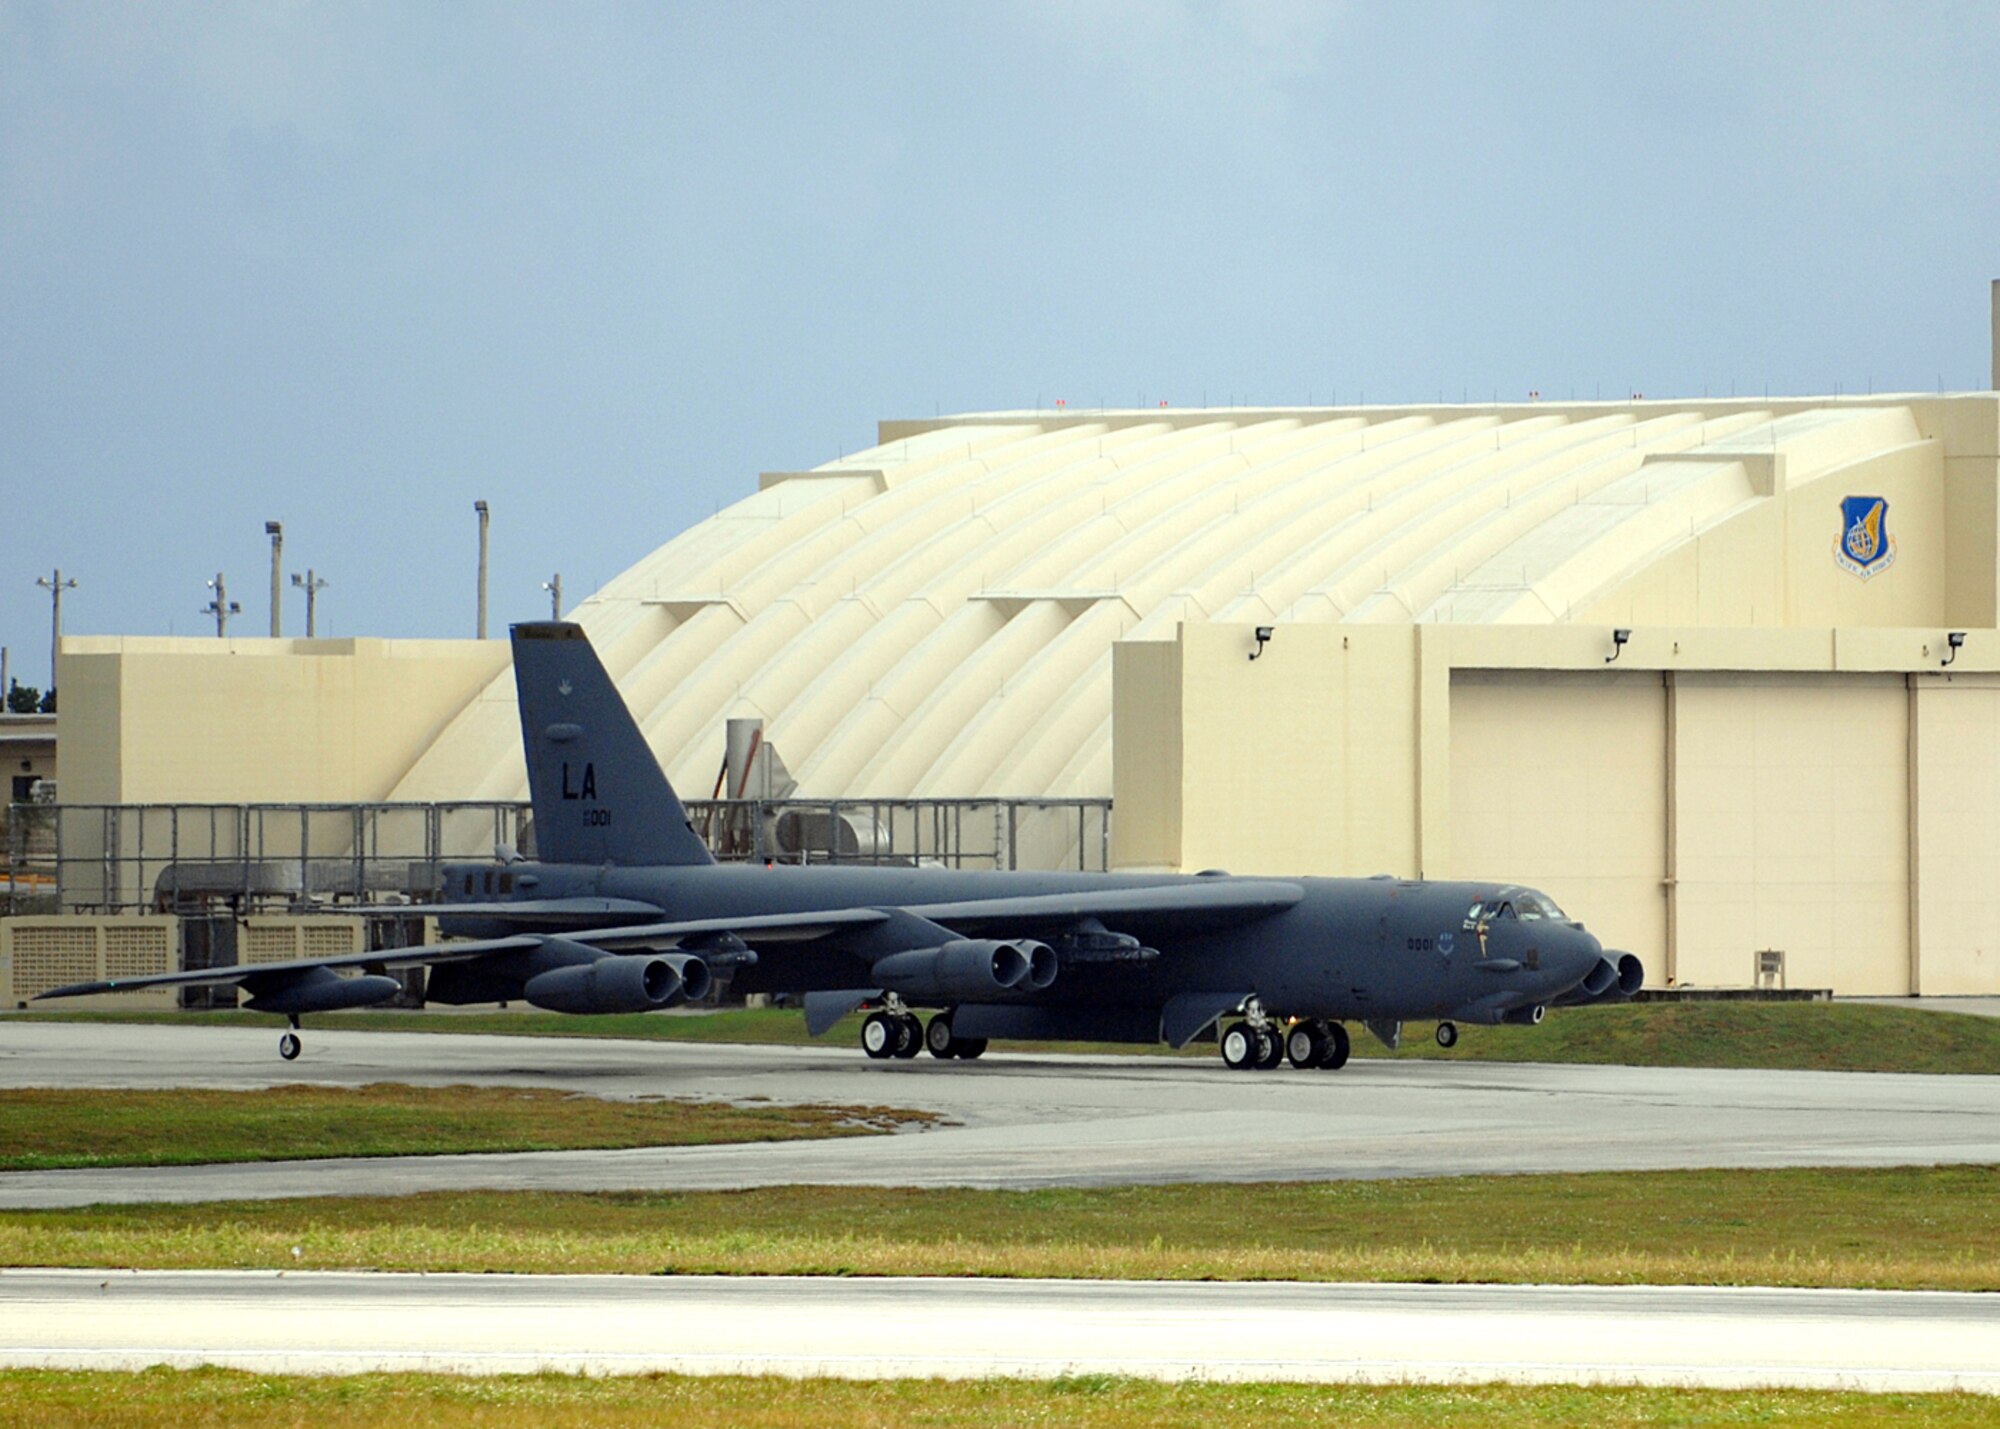 Andersen AFB, Guam -- The first of six B-52 Stratofortress bombers  from the 96th Expeditionary Bomb Squadron arrive on Andersen AFB. The rotating bomber units promote security and stability in the region as well as provide unique aircrew training opportunities. The 96th EBS is deployed here from Barksdale AFB, La.
(U.S. Air Force Photo By Staff Sgt. Vanessa Valentine) 